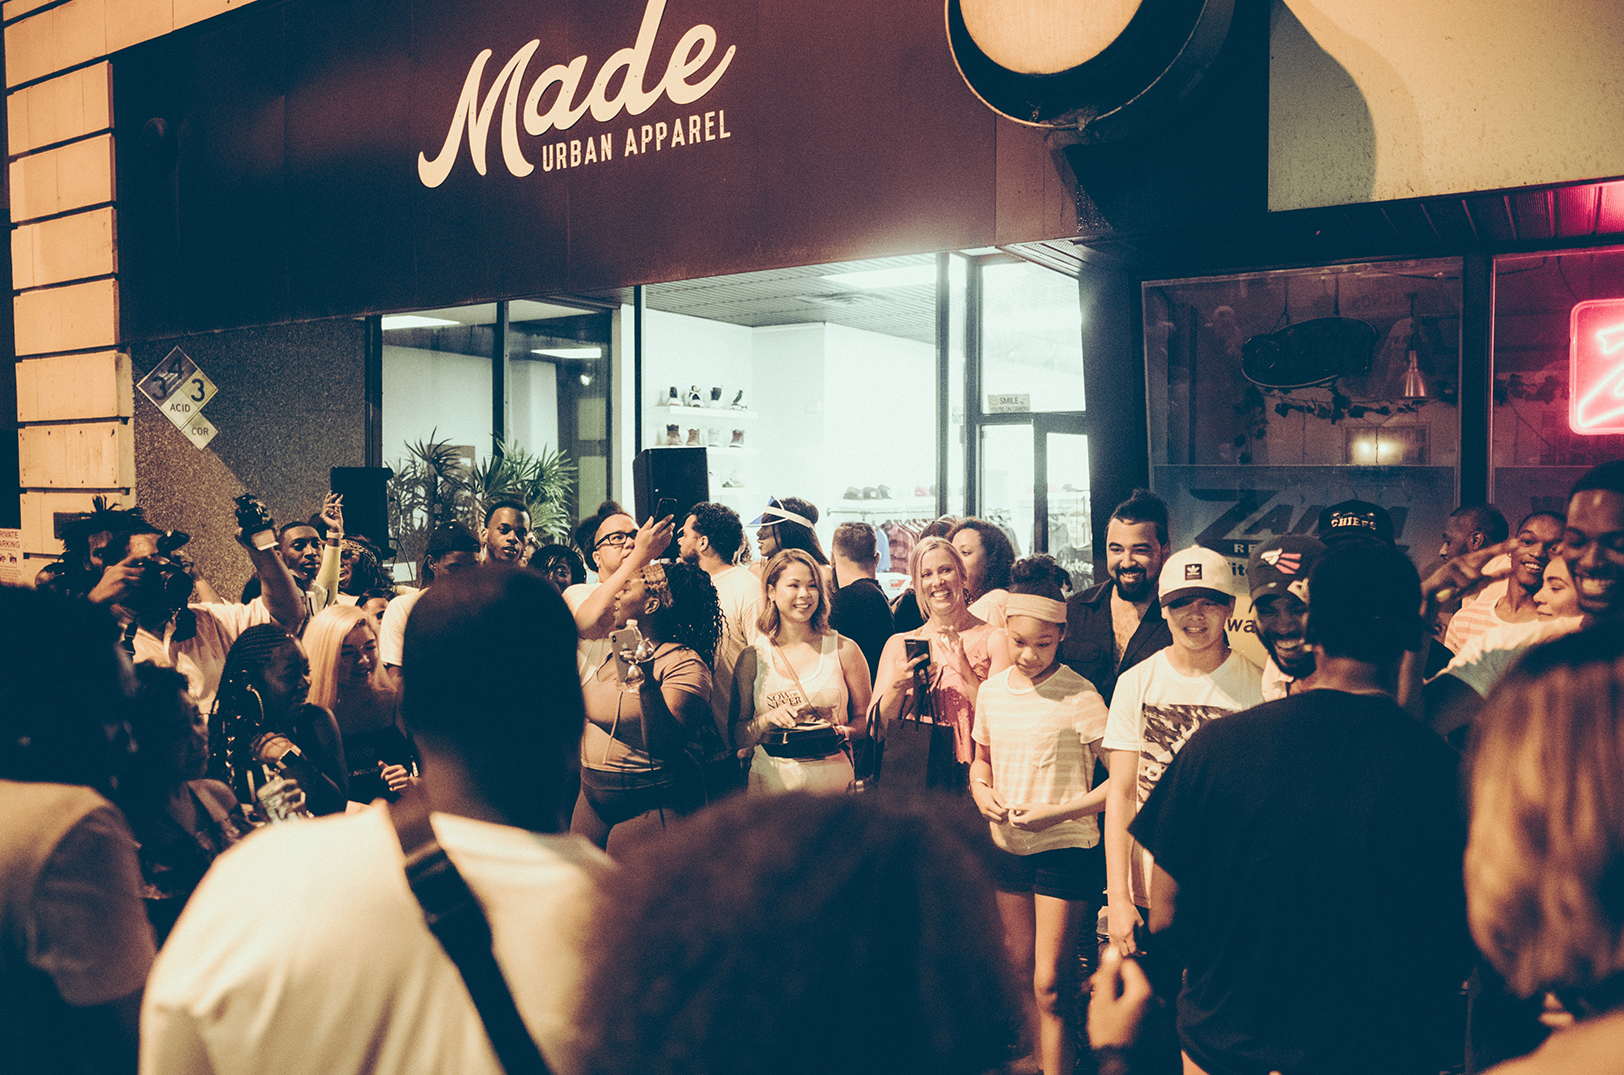 Previous MADE MOBB block party at the brand's former Grand Boulevard location